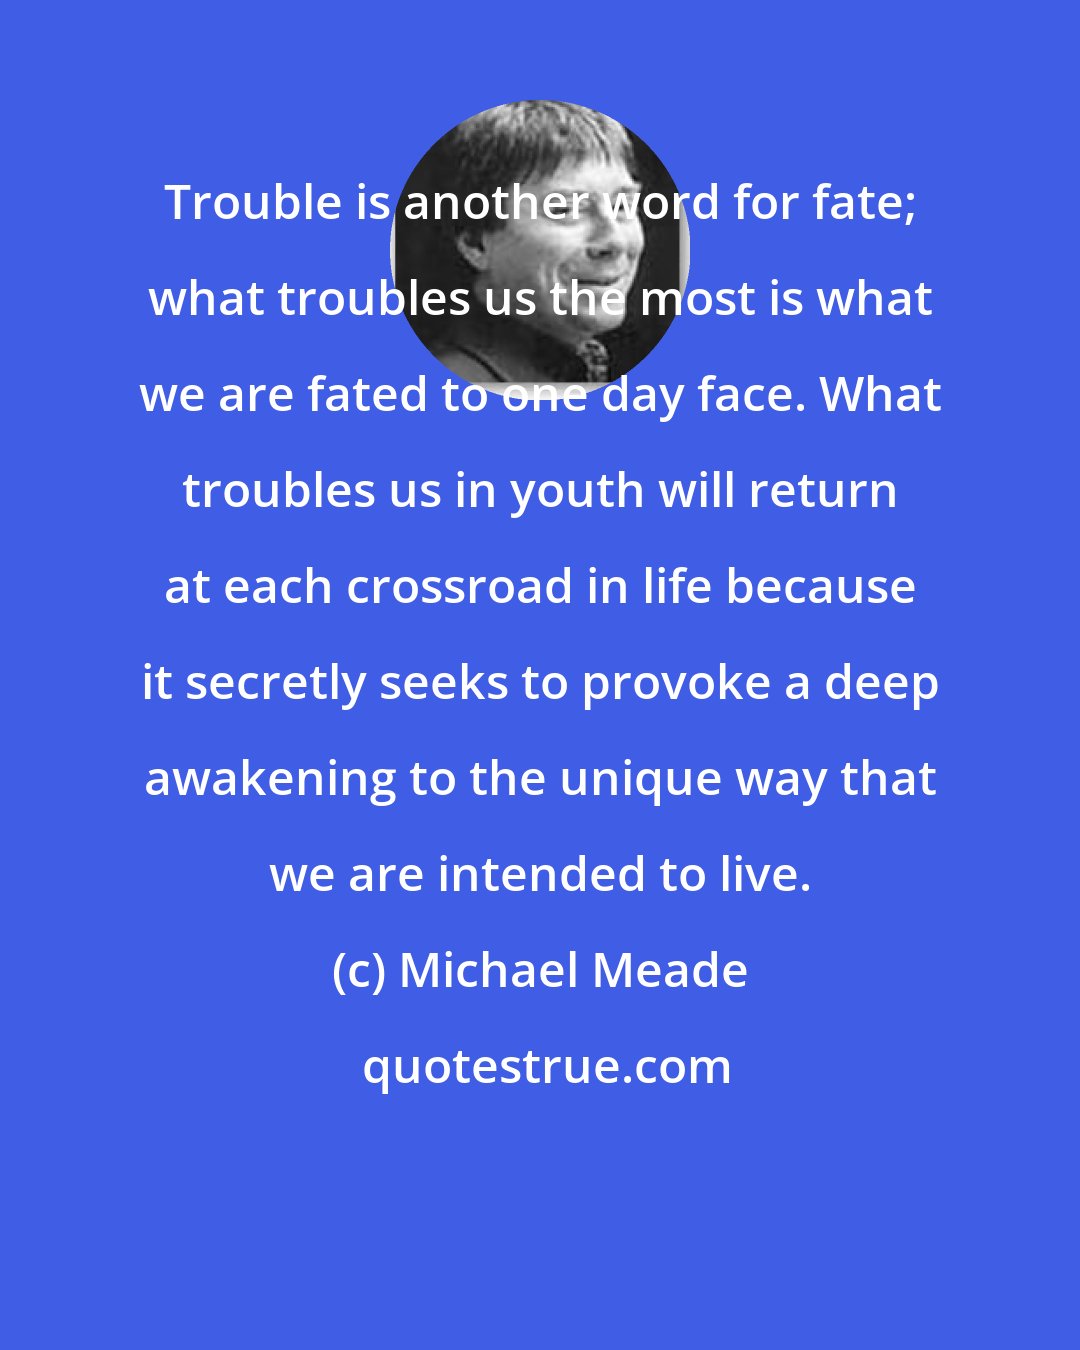 Michael Meade: Trouble is another word for fate; what troubles us the most is what we are fated to one day face. What troubles us in youth will return at each crossroad in life because it secretly seeks to provoke a deep awakening to the unique way that we are intended to live.